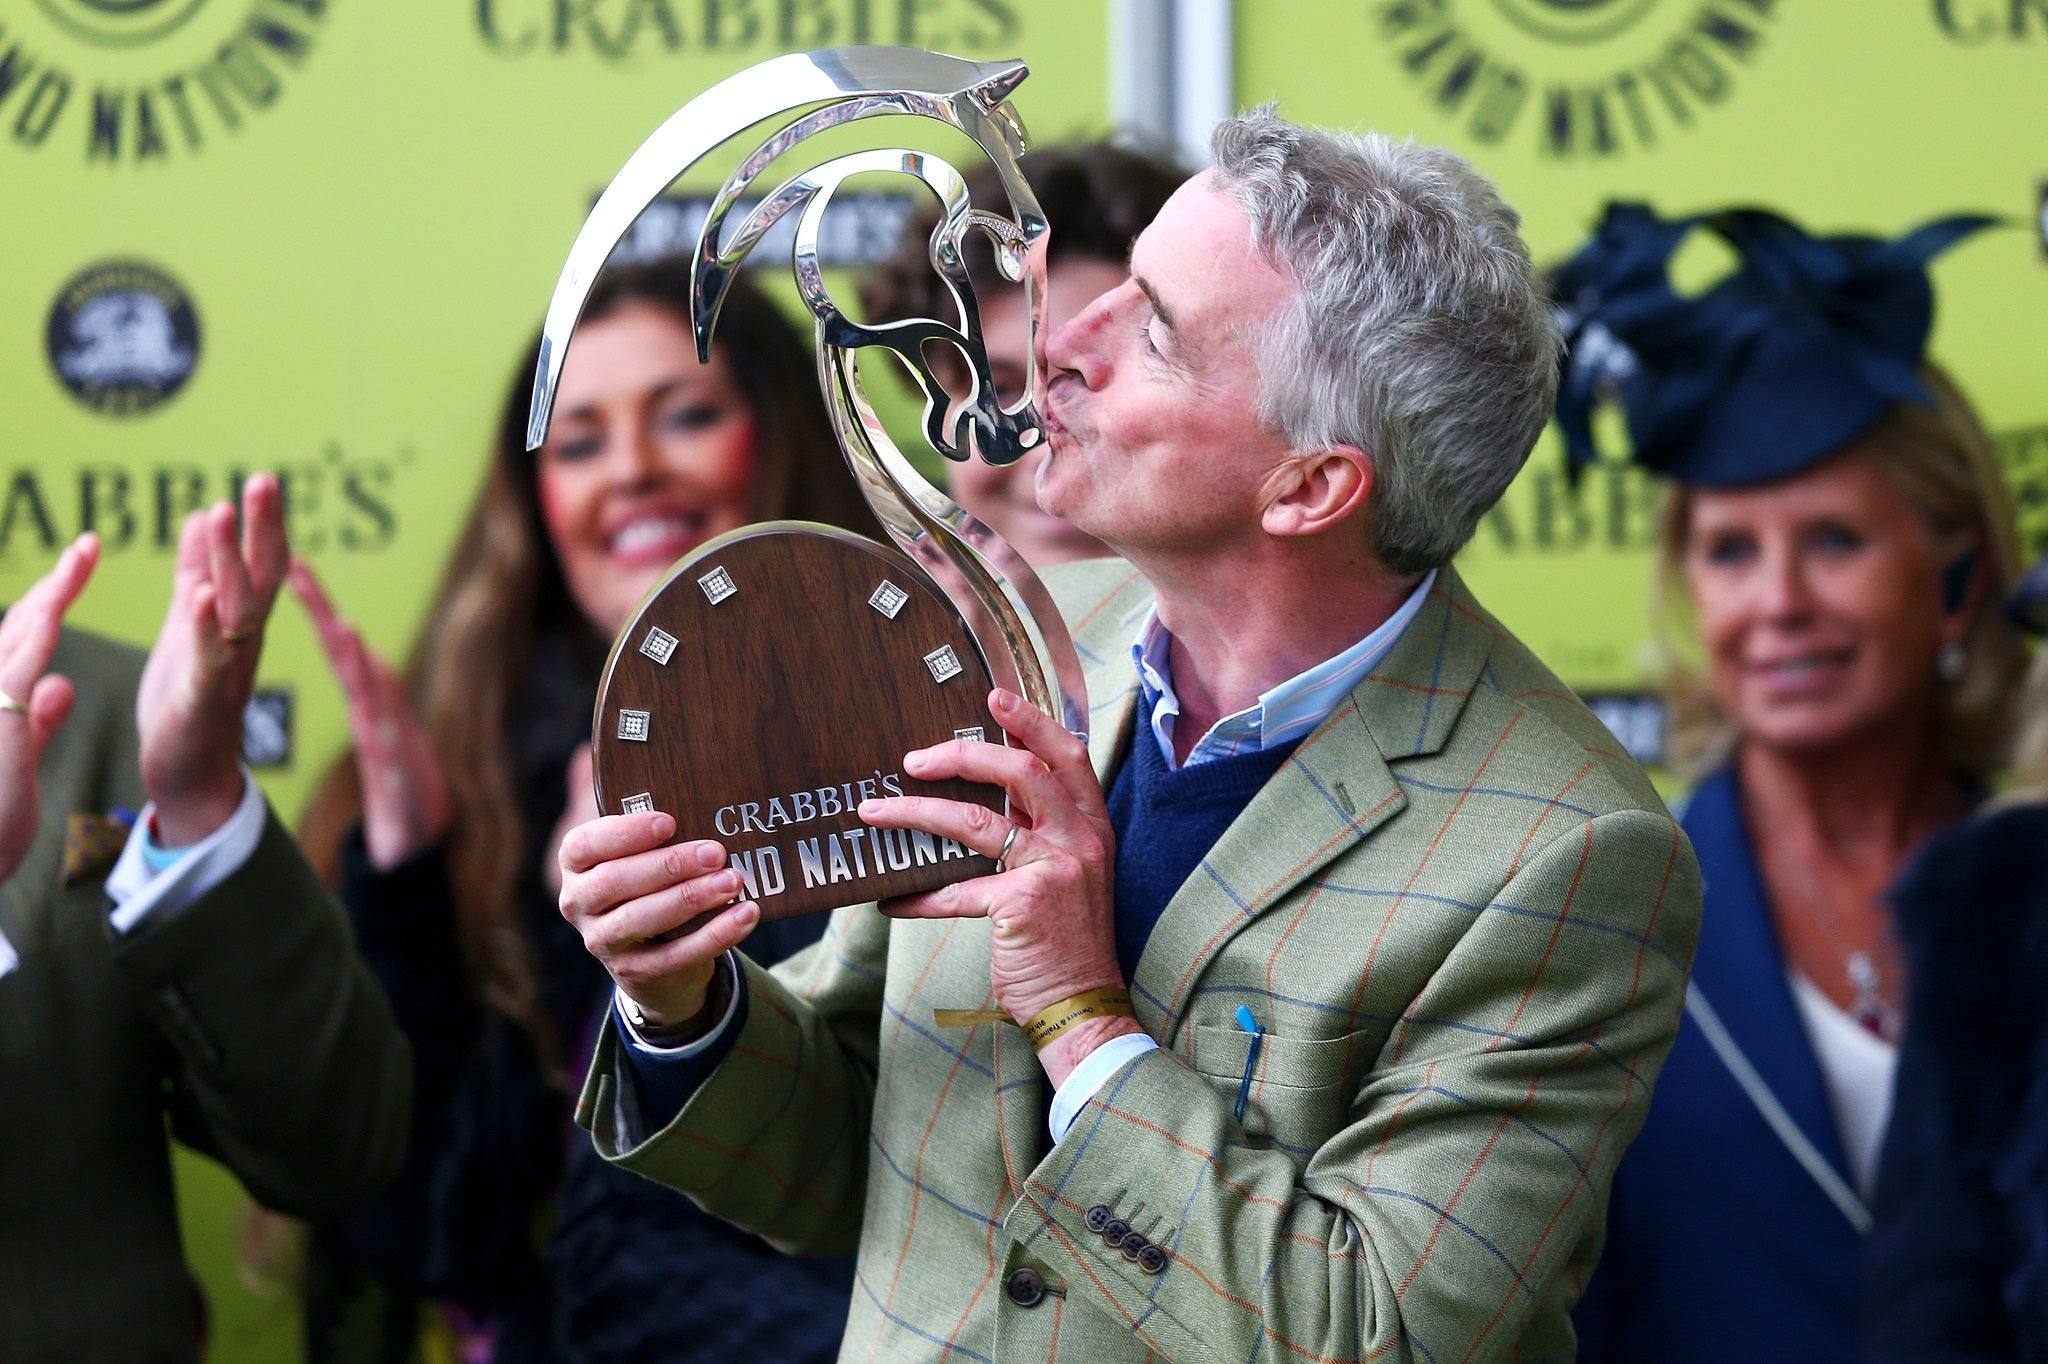 Ryanair CEO Michael O'Leary celebrates after his horse, Rules The World, won the Grand National